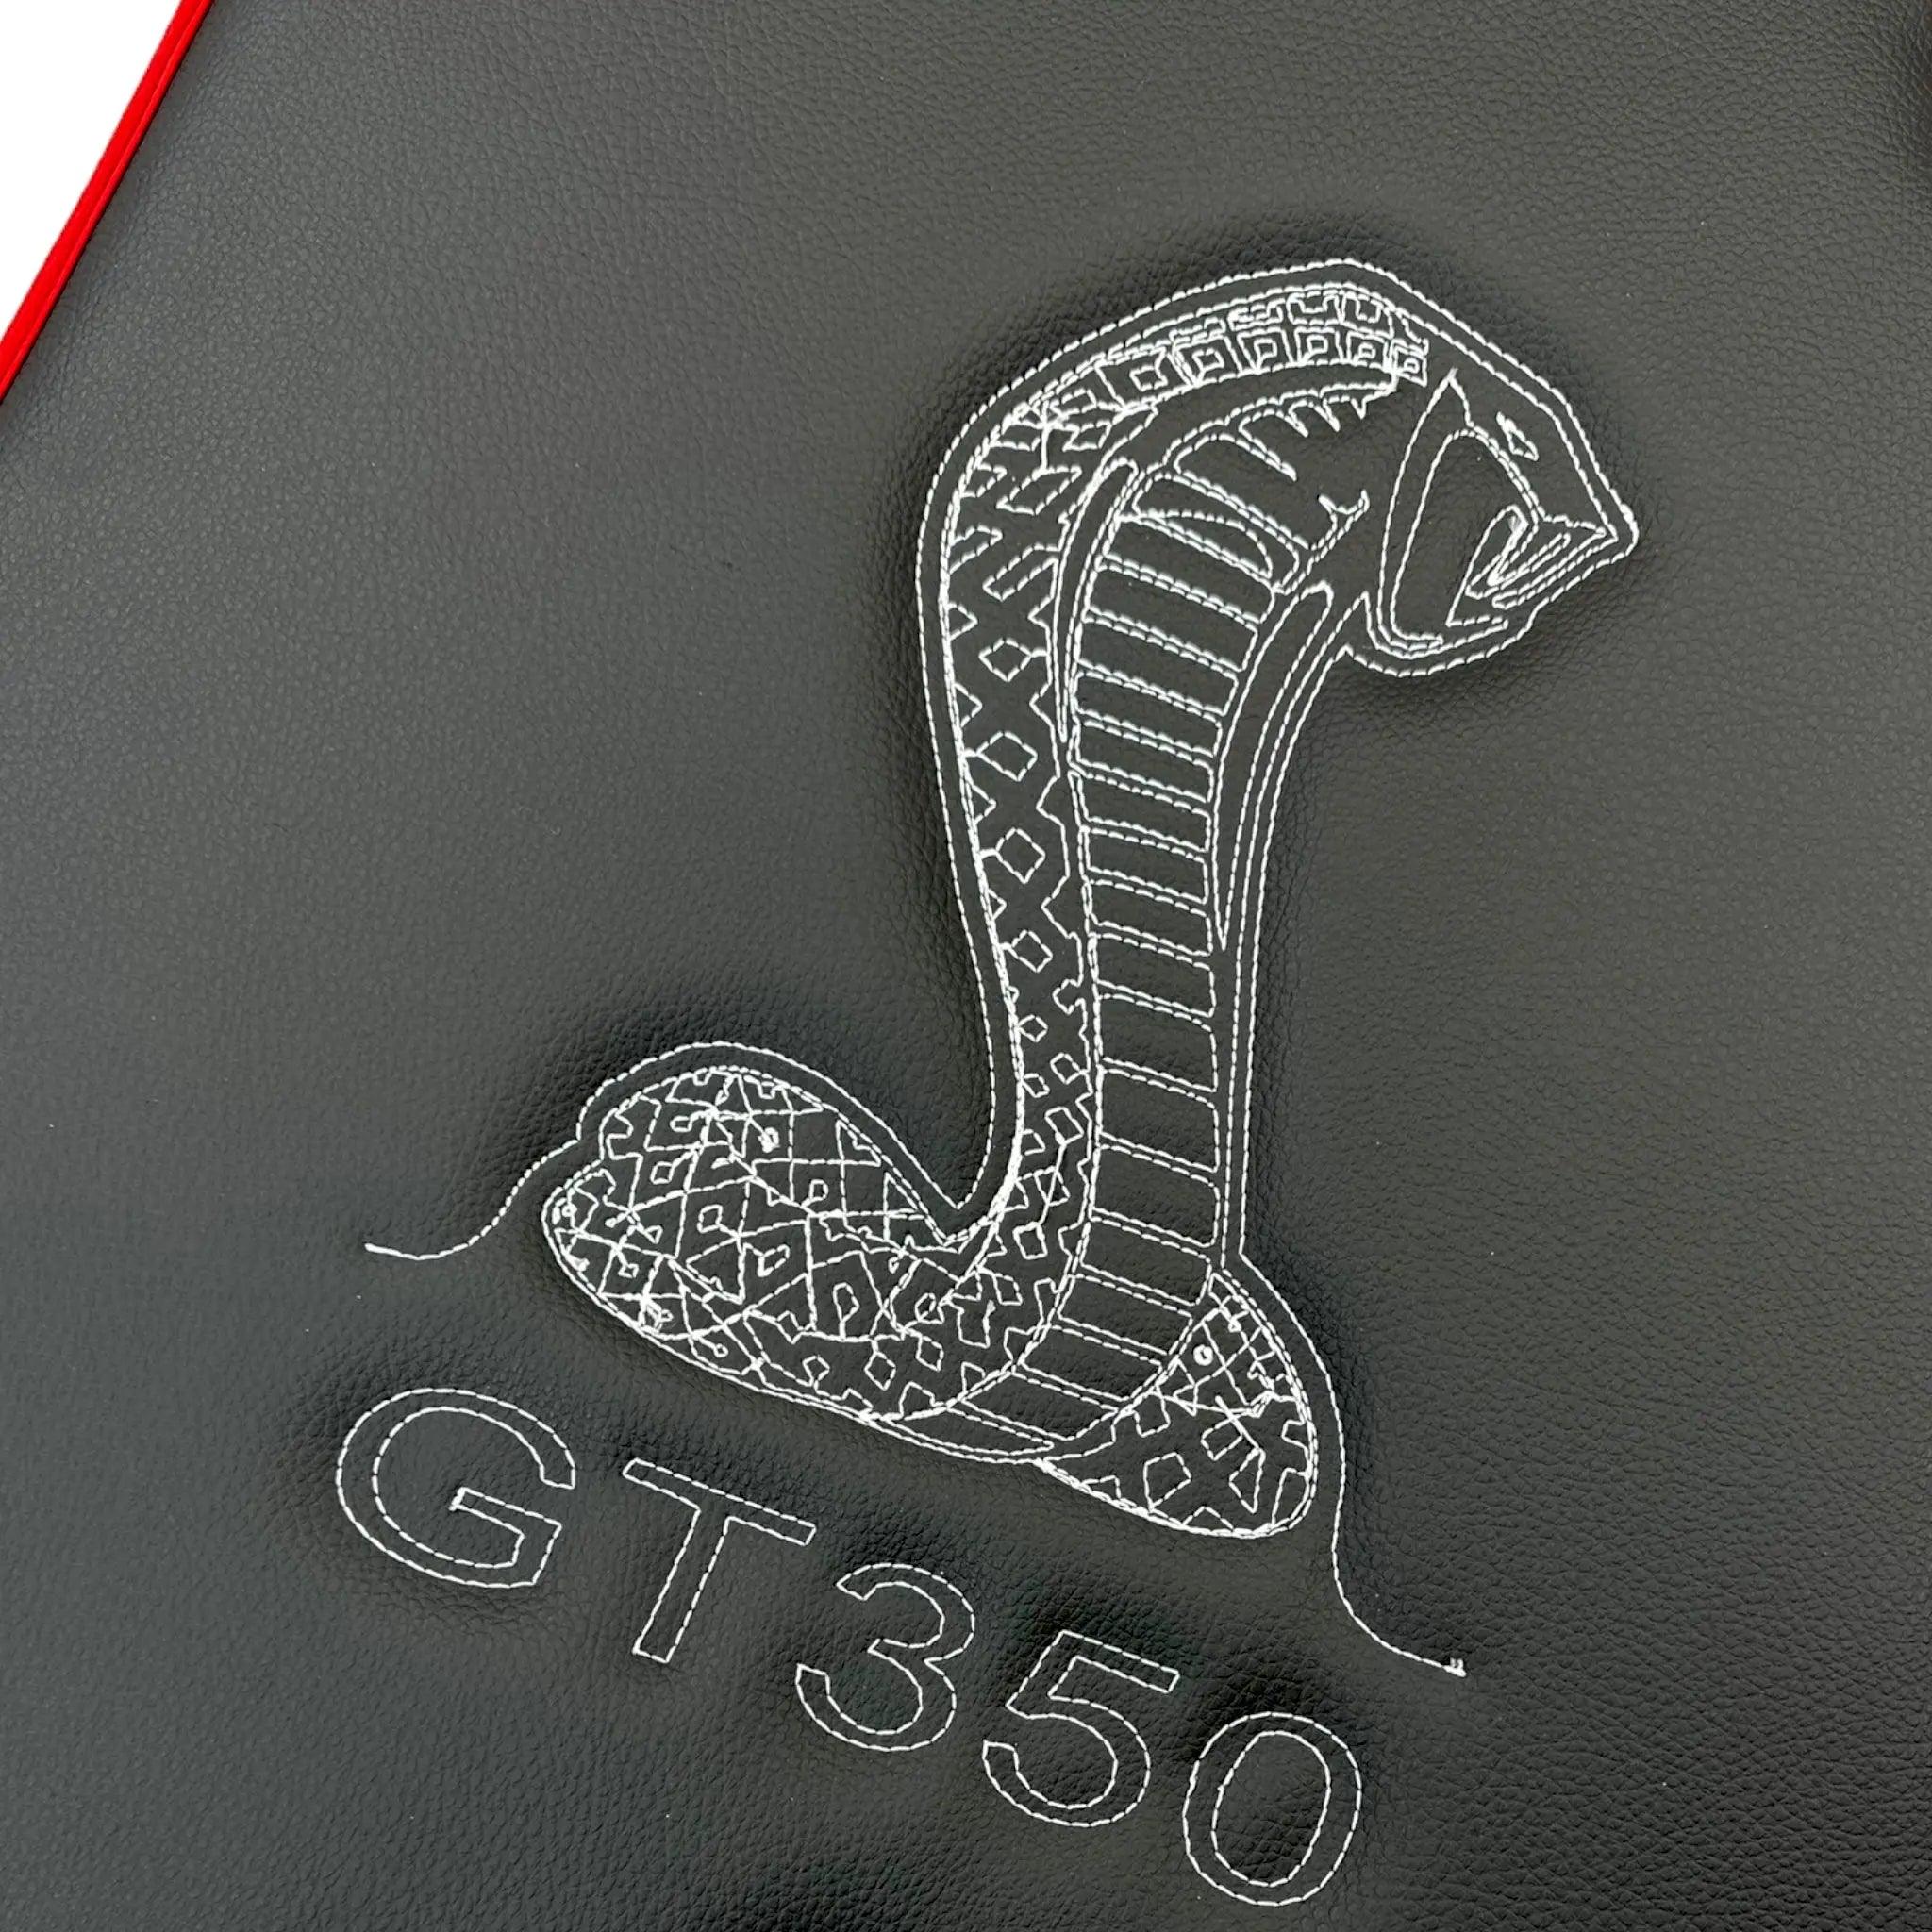 Leather Floor Mats with Red Trim for Ford Mustang GT350 Shelby (2015-2021) with Cobra Sewing